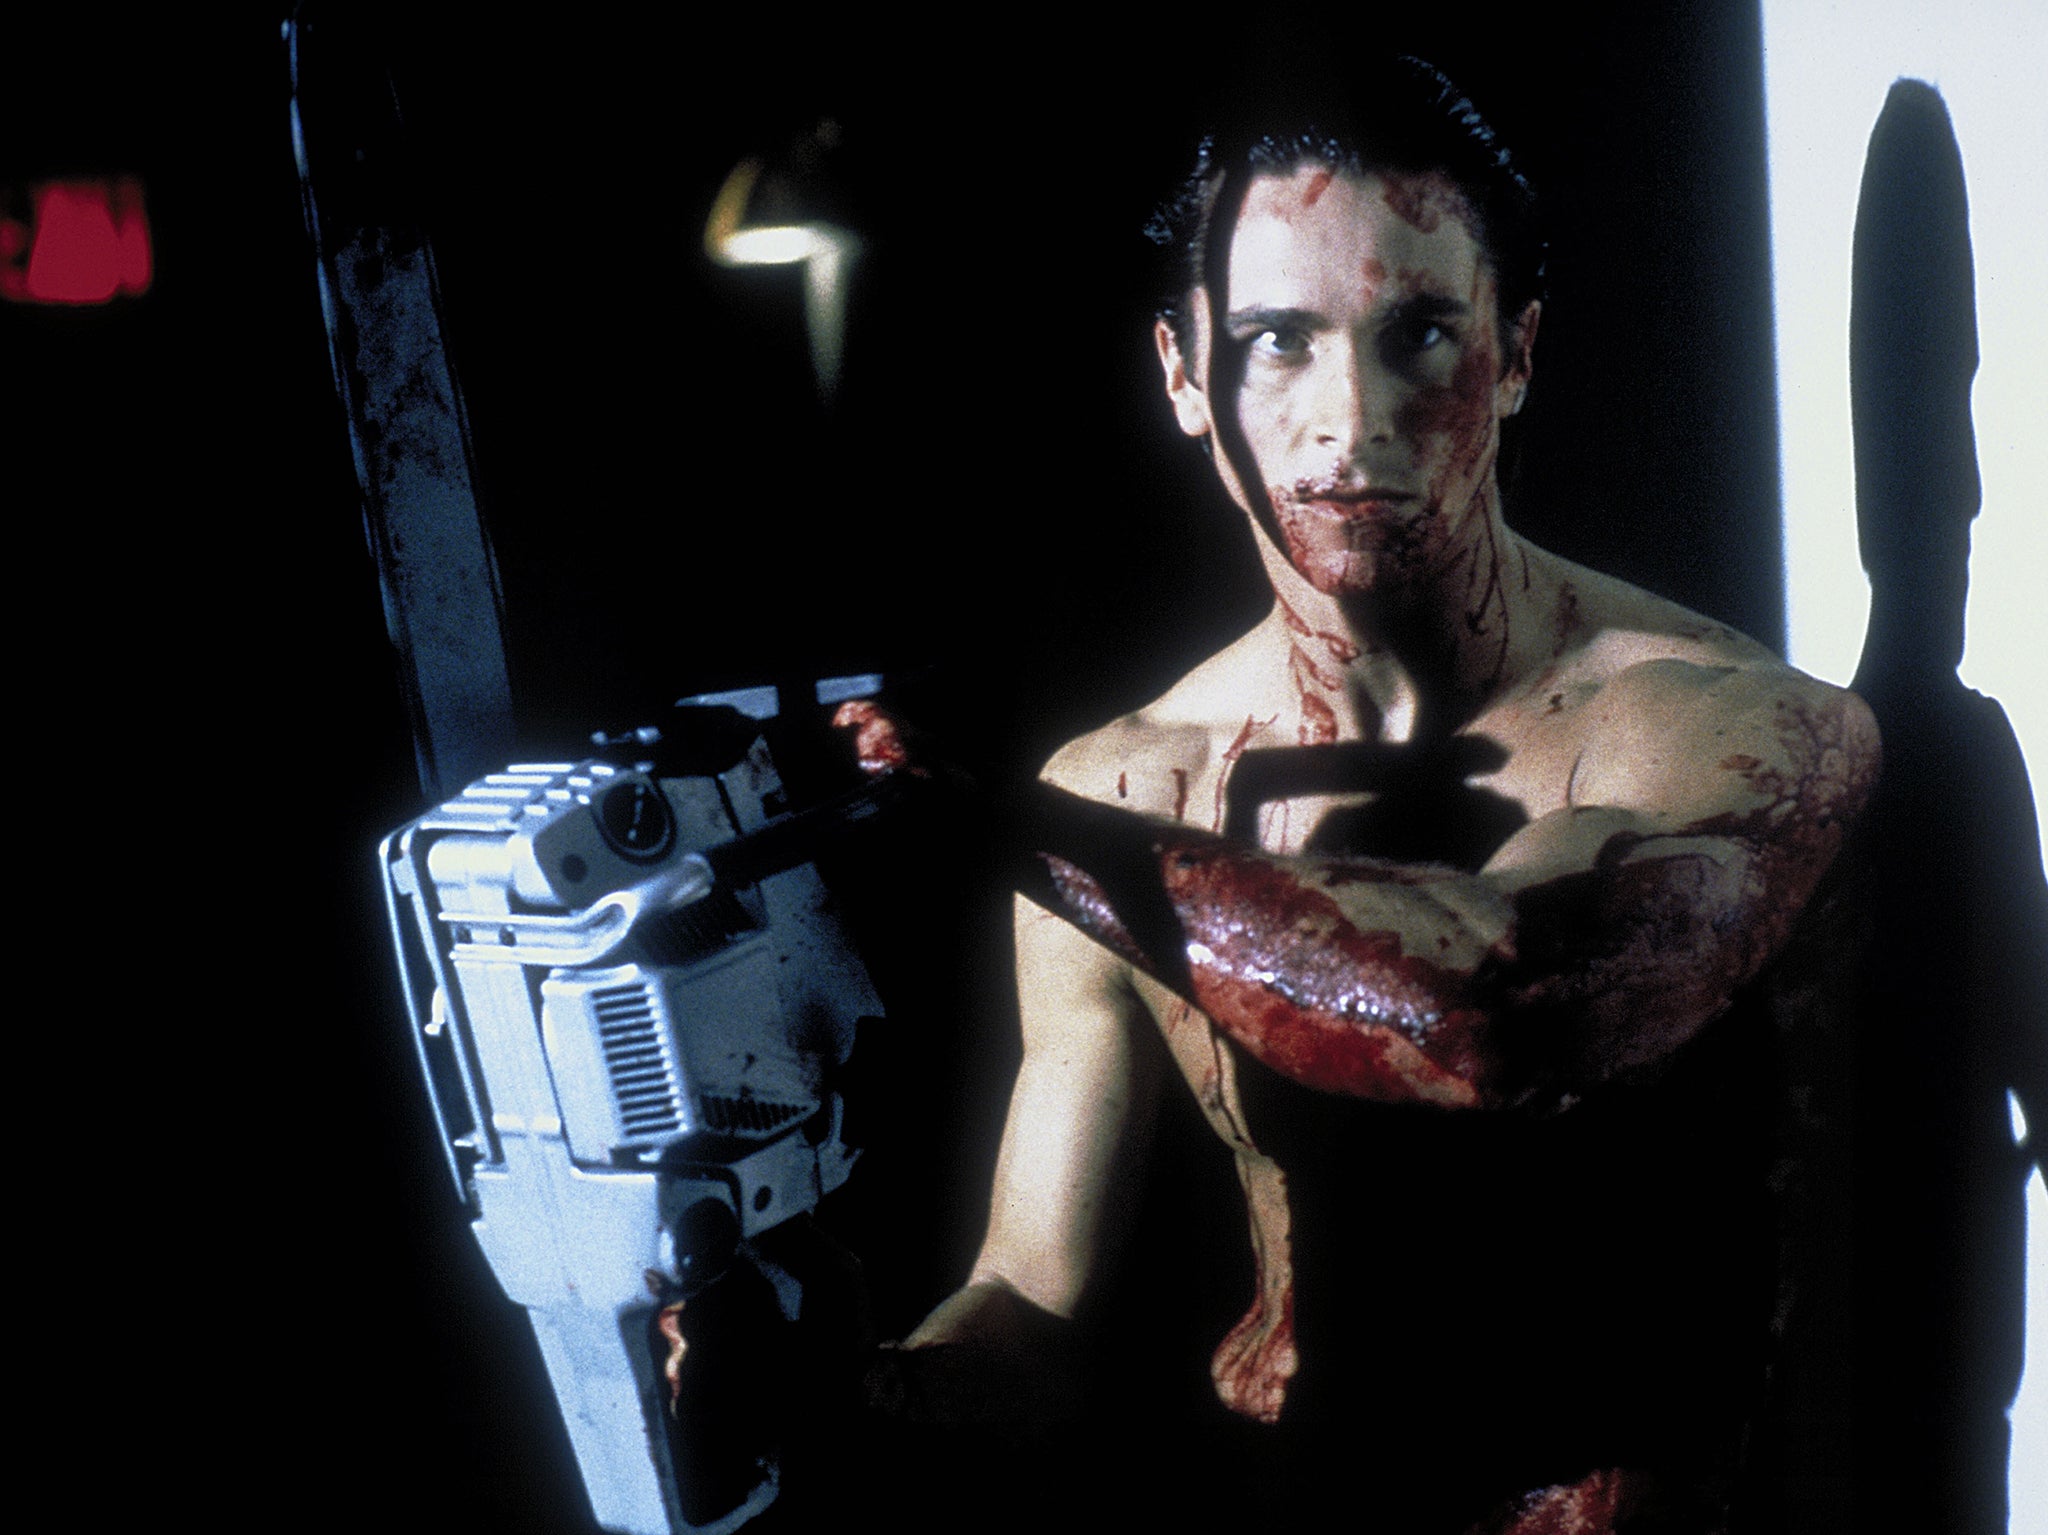 ‘American Psycho’ was adapted into a movie in 2000, with Christian Bale in the lead role (Rex)